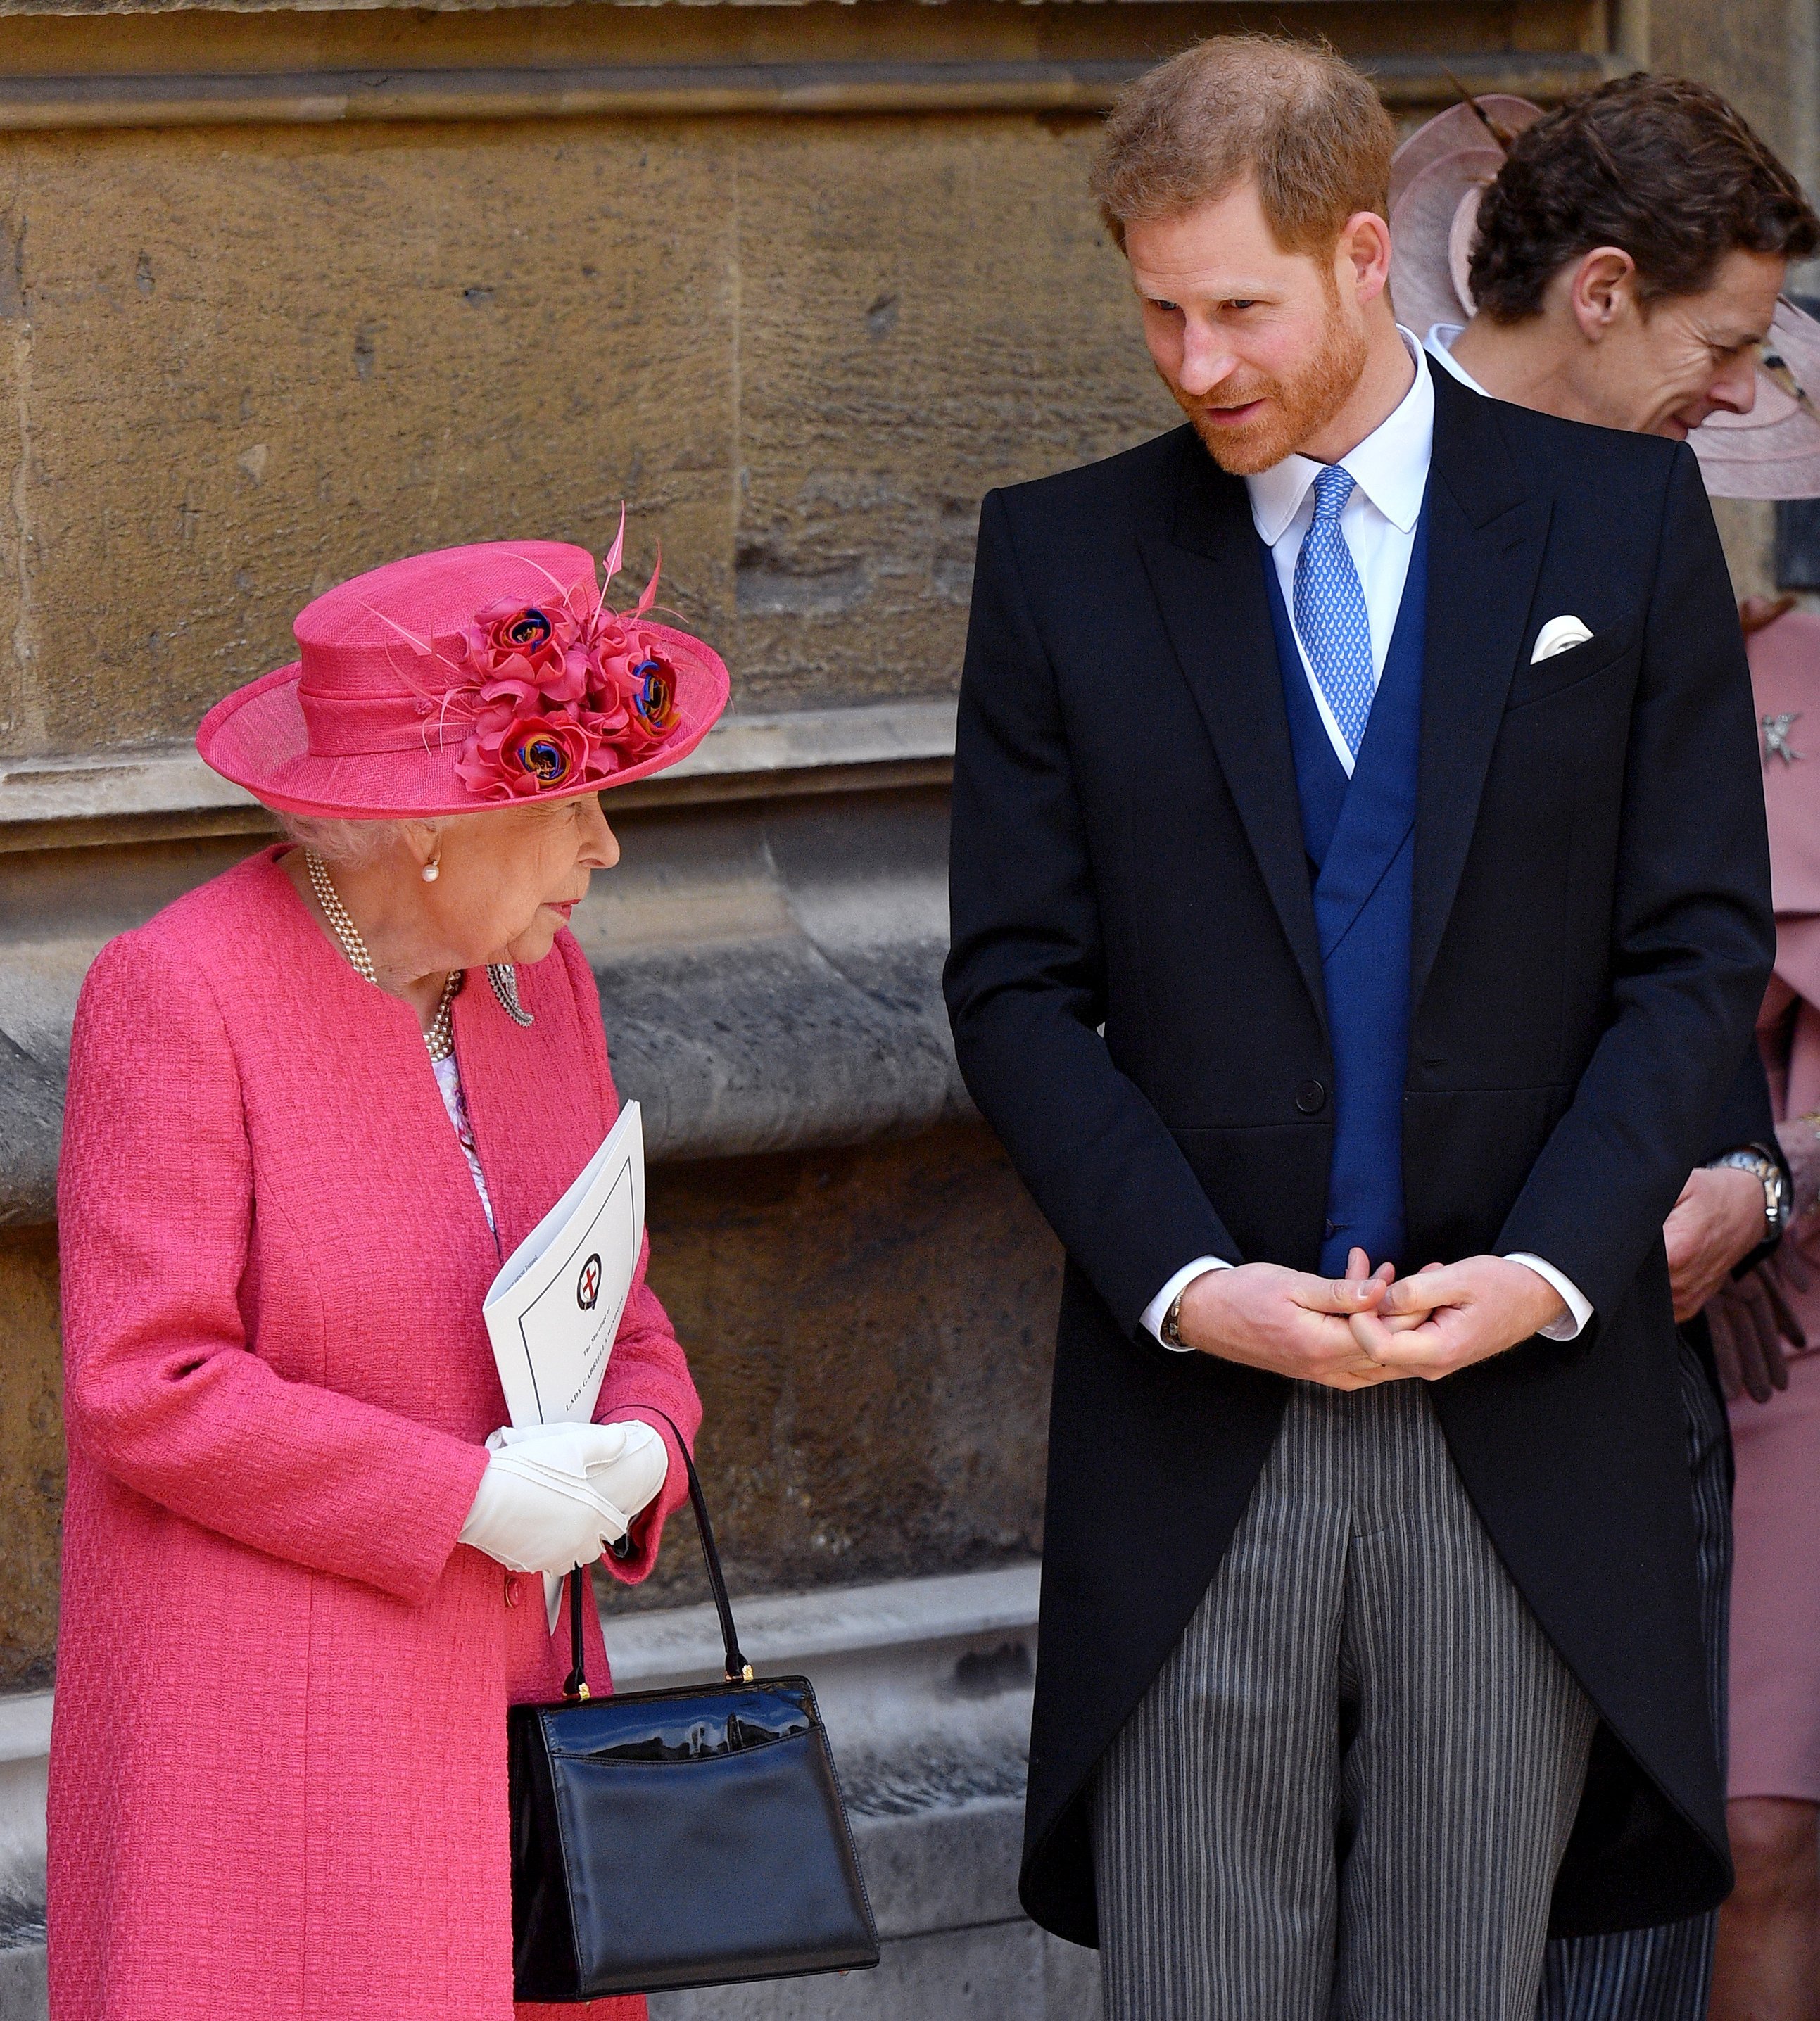  Queen Elizabeth II and Prince Harry otuside St George's Chapel in Windsor Castle, England | Photo: Getty Images